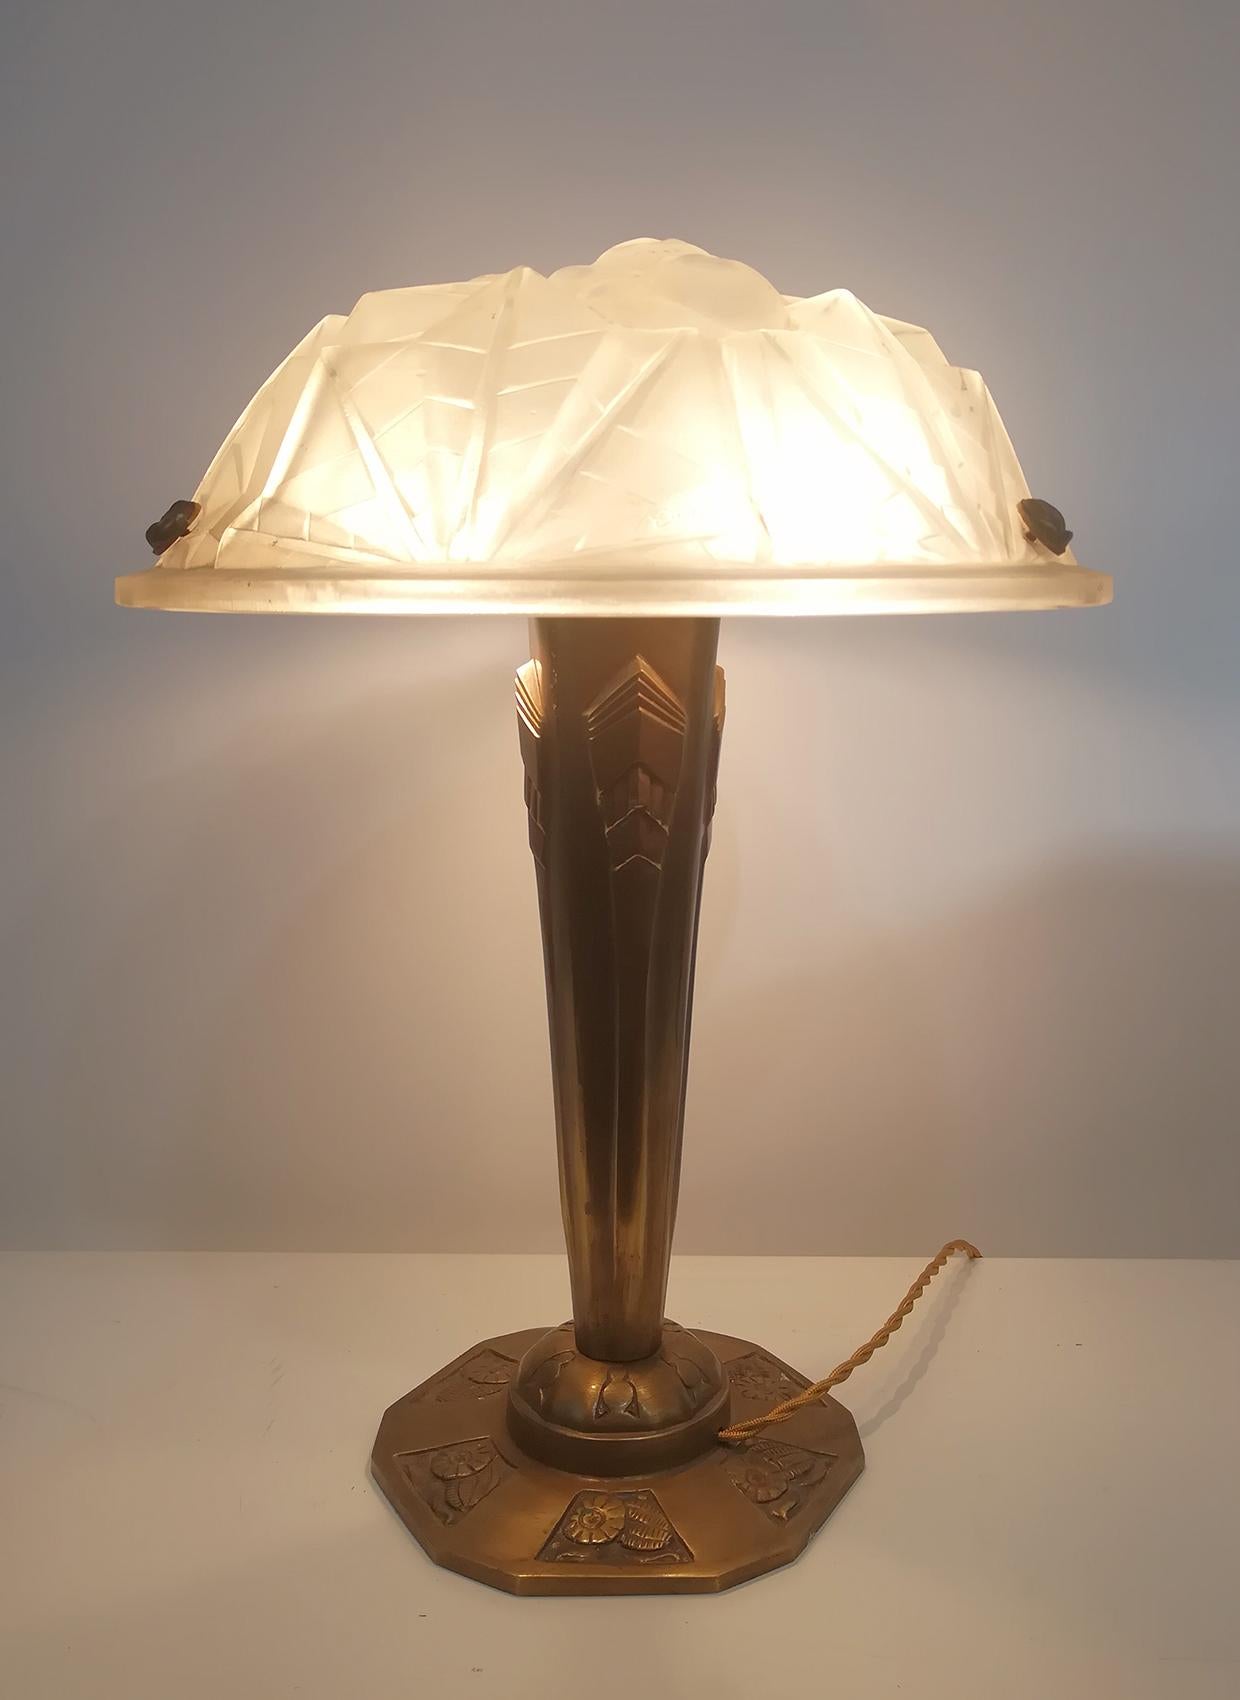 Charming pair of Art Deco table lamp, high quality molded glass panel (diameter 35 cm) with rare original floral motif design in relief included “Degué” signature on the glass, resting on bronze column with floral and geometric design